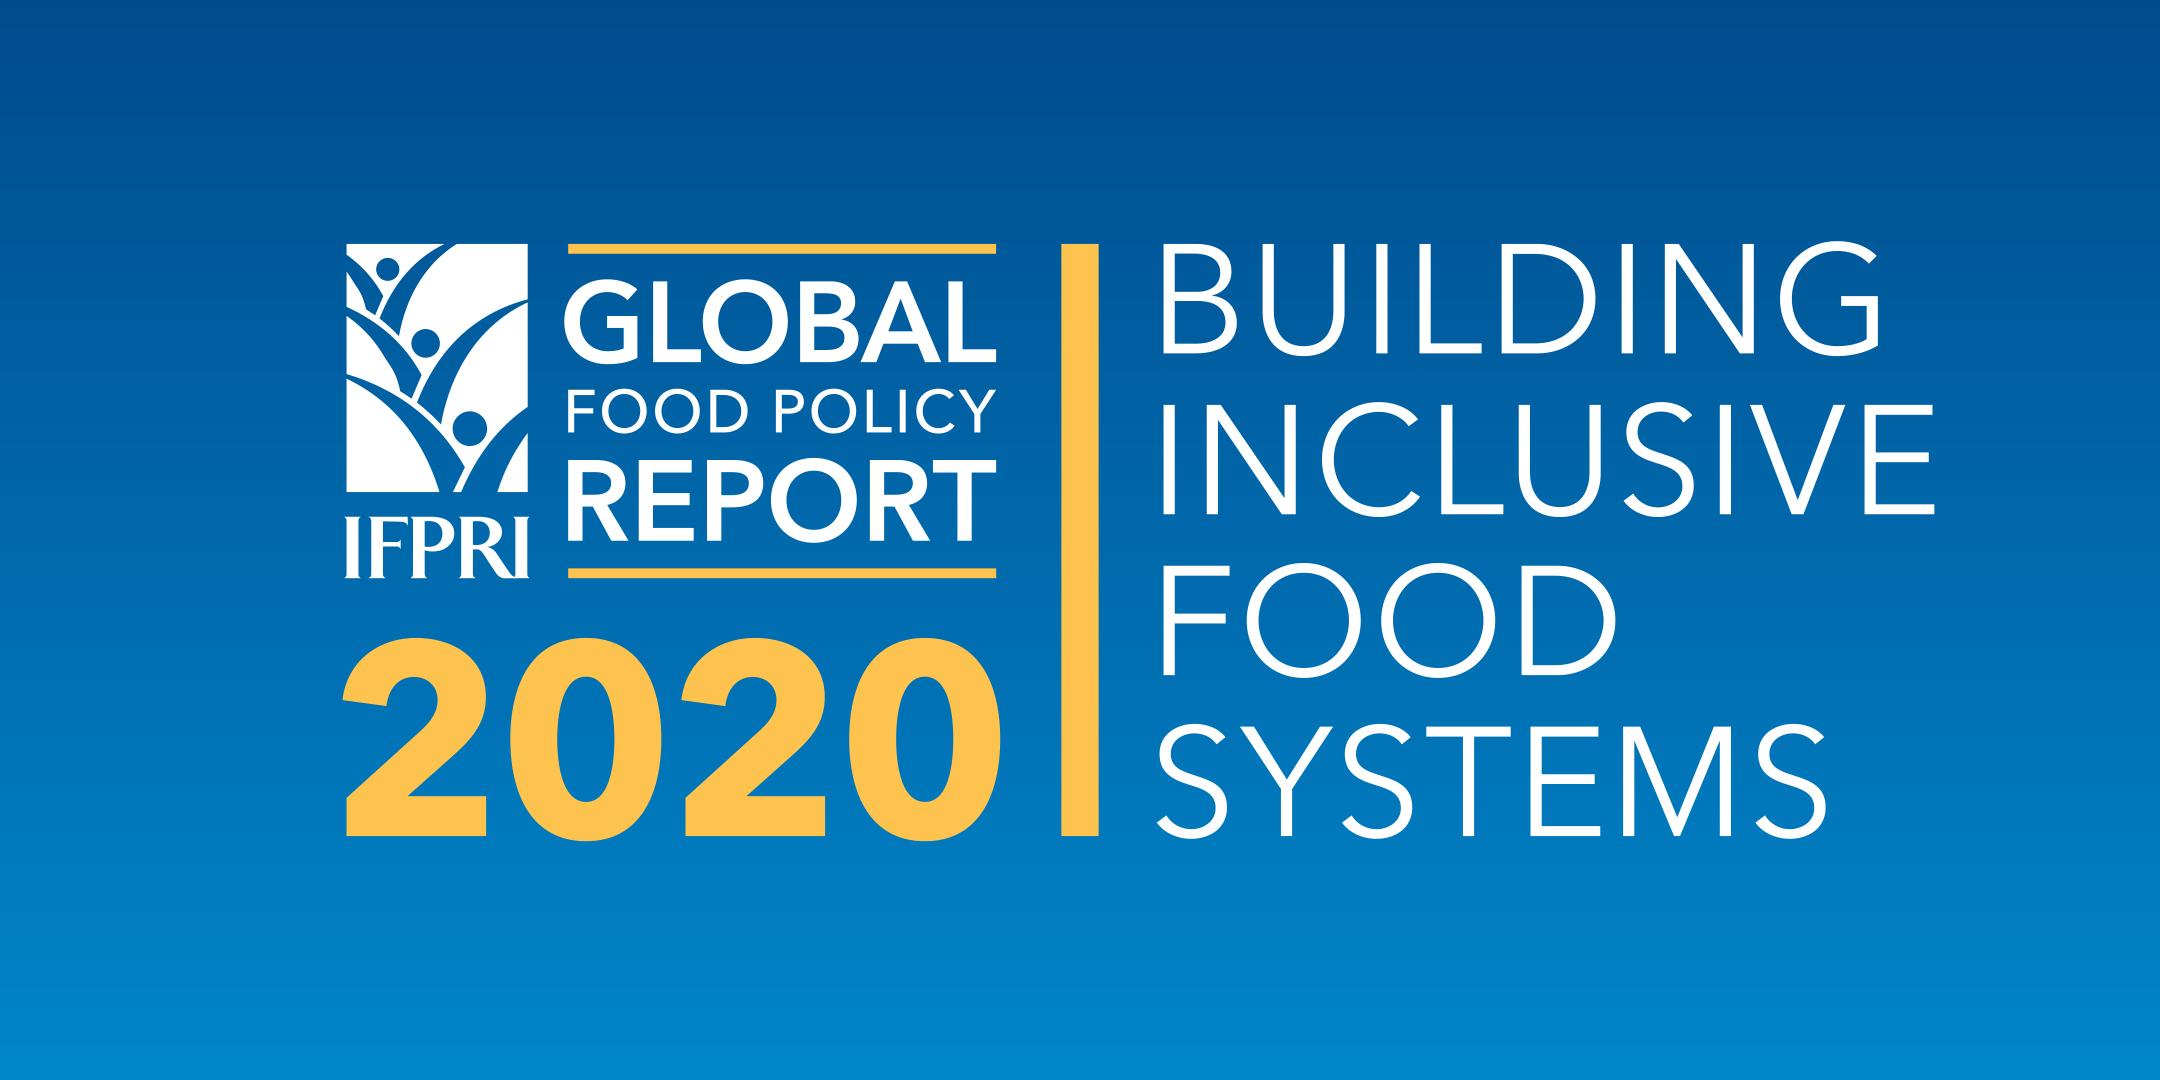 LAUNCH EVENT - Global Food Policy Report 2020: Building Inclusive Food Systems